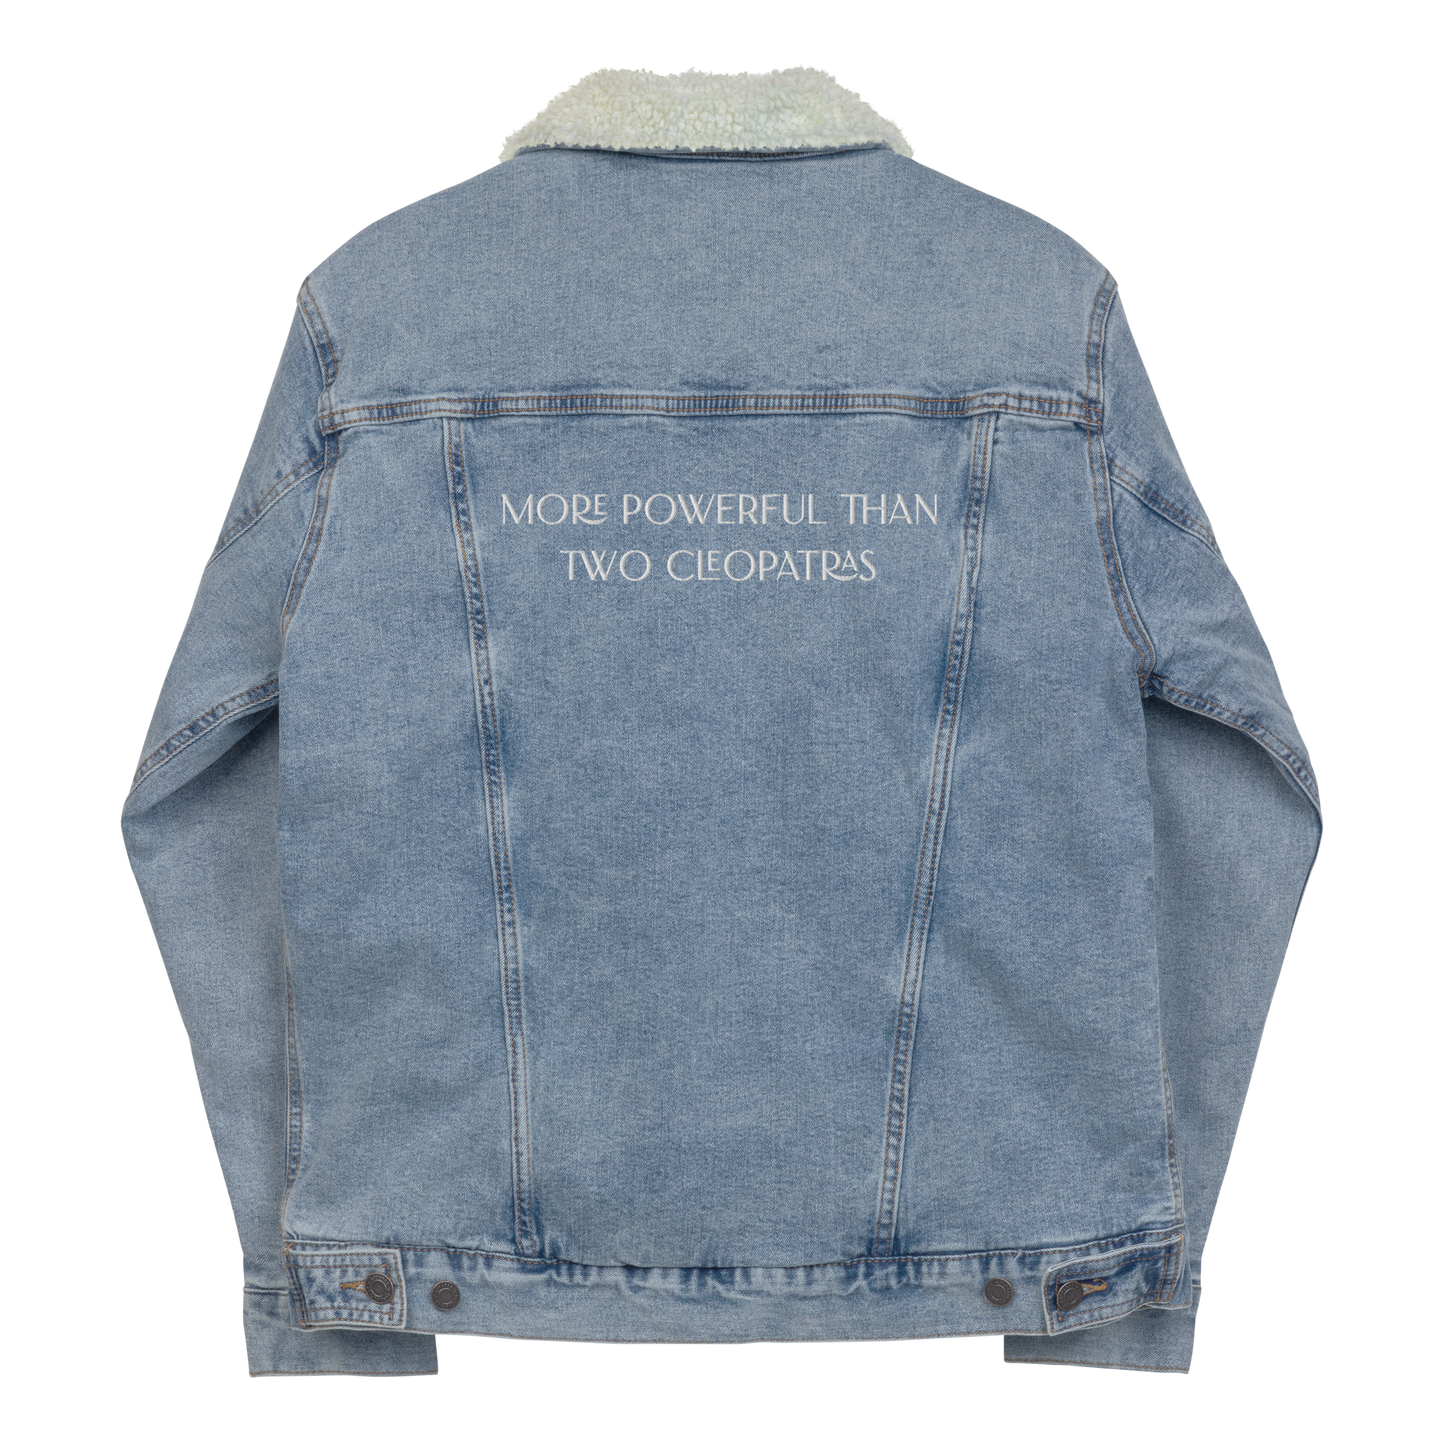 More Powerful Than Two Cleopatras Sherpa Denim Jacket